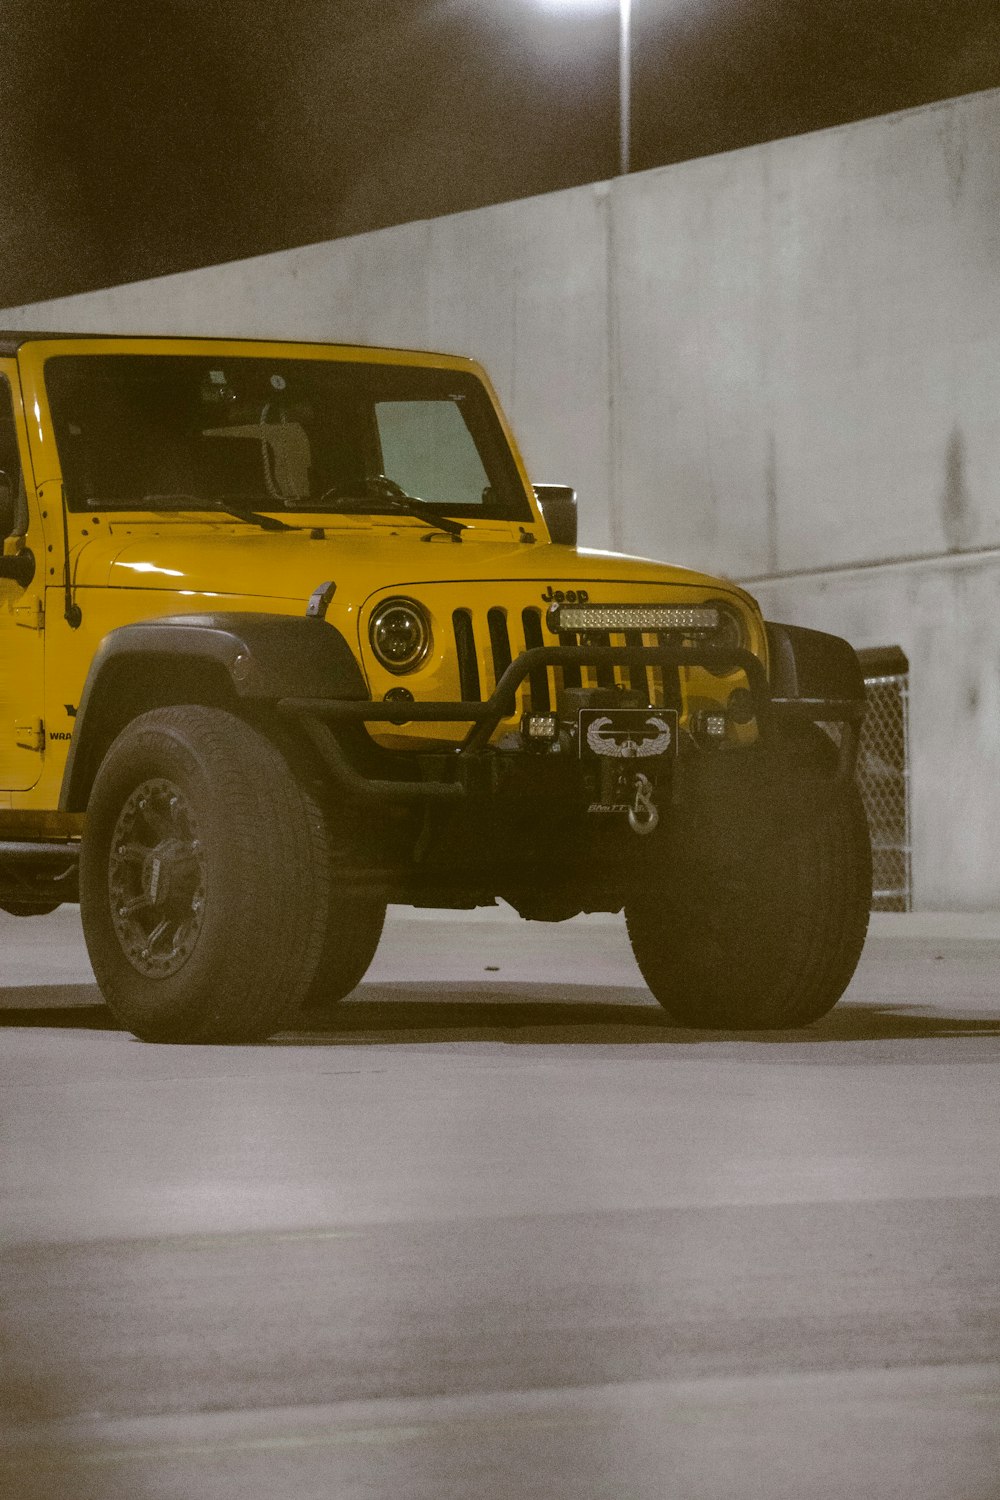 a yellow jeep parked in a parking garage